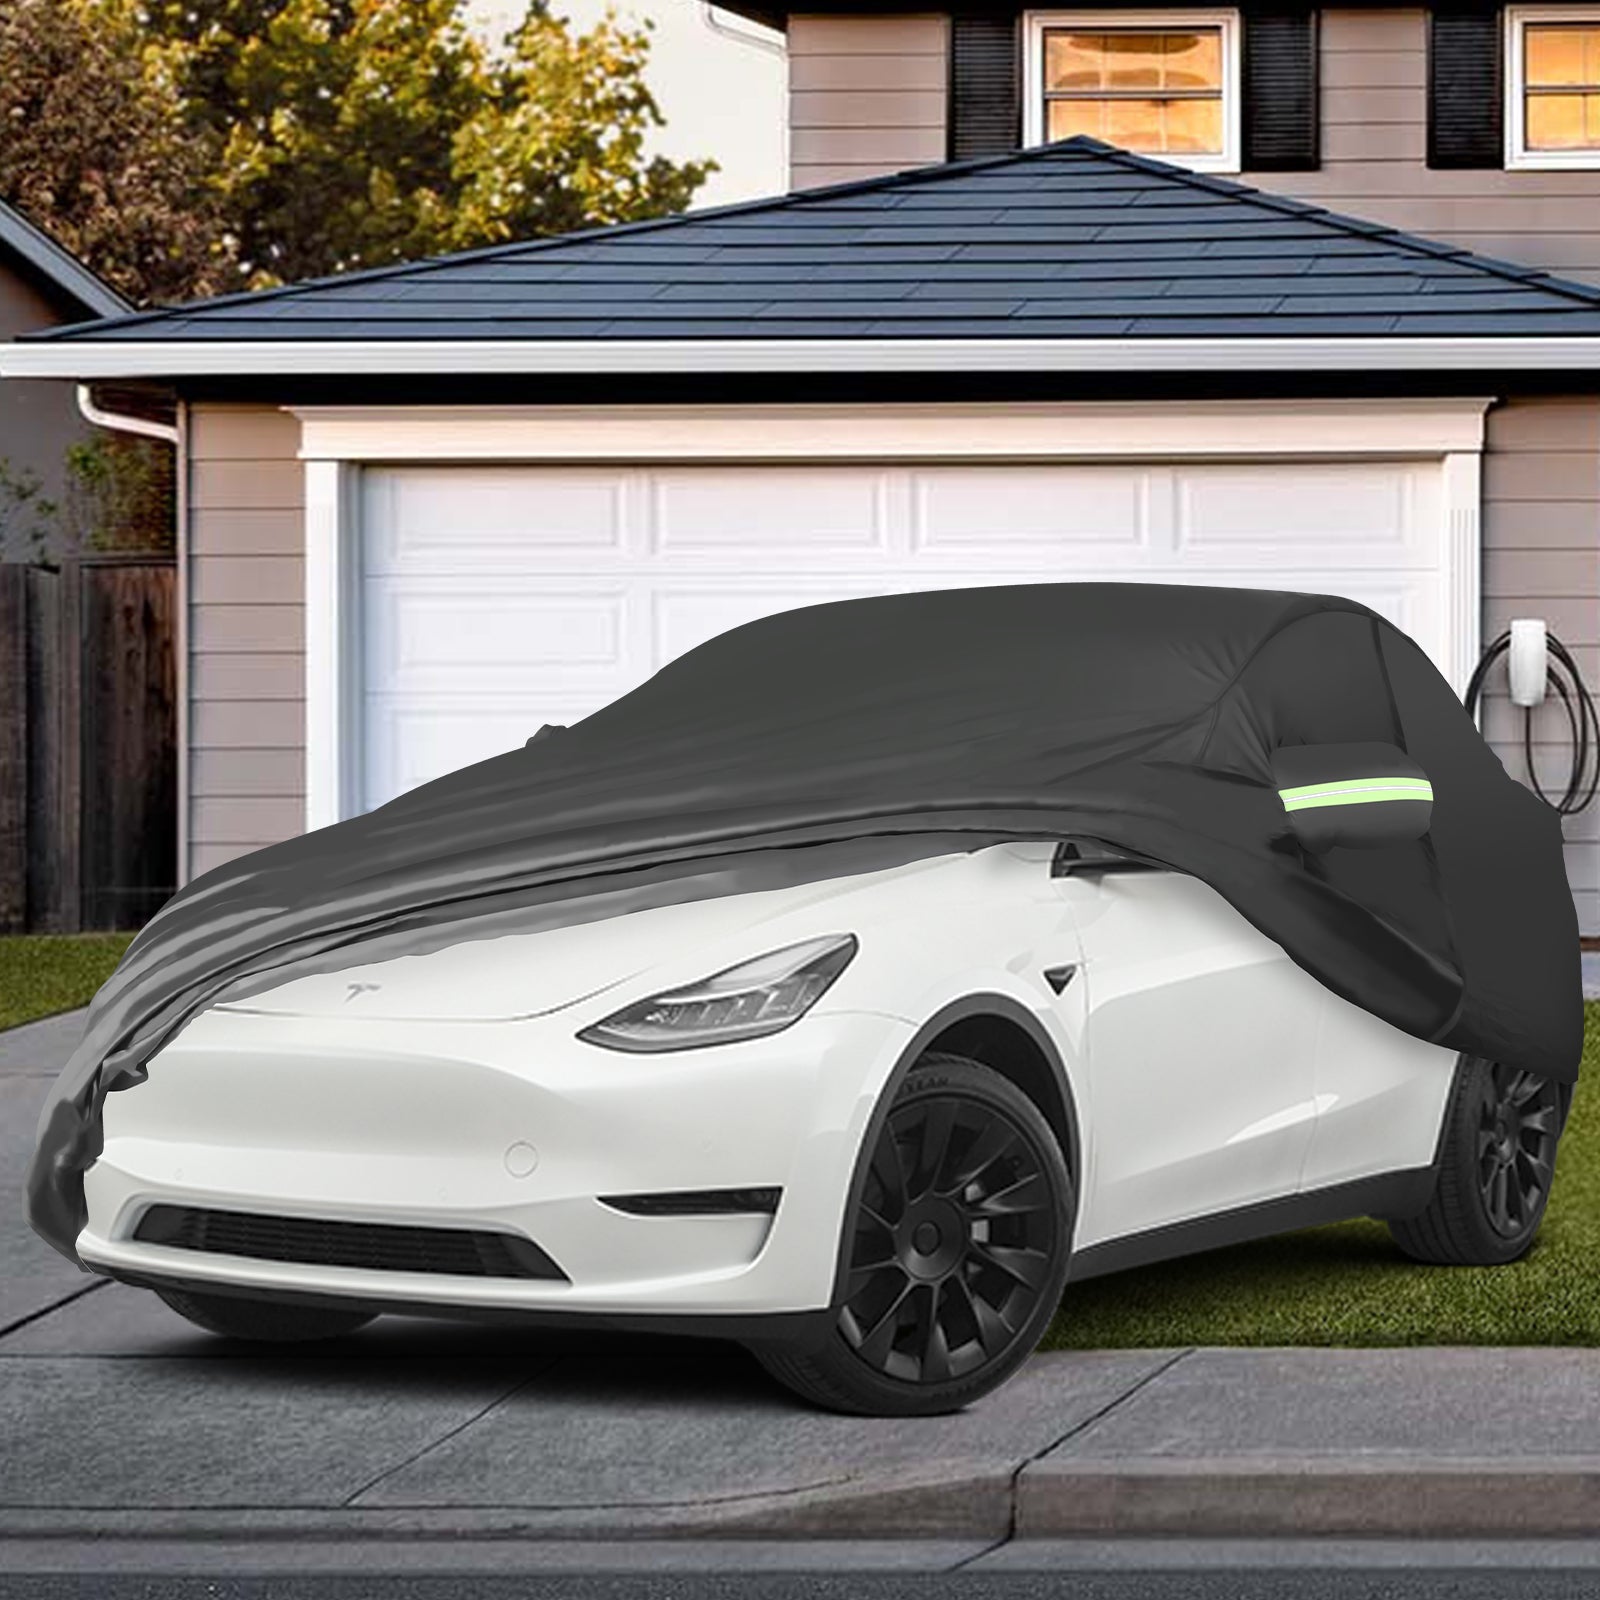  5 Layer Car Cover for 2020-2023 Tesla Model Y, Semi